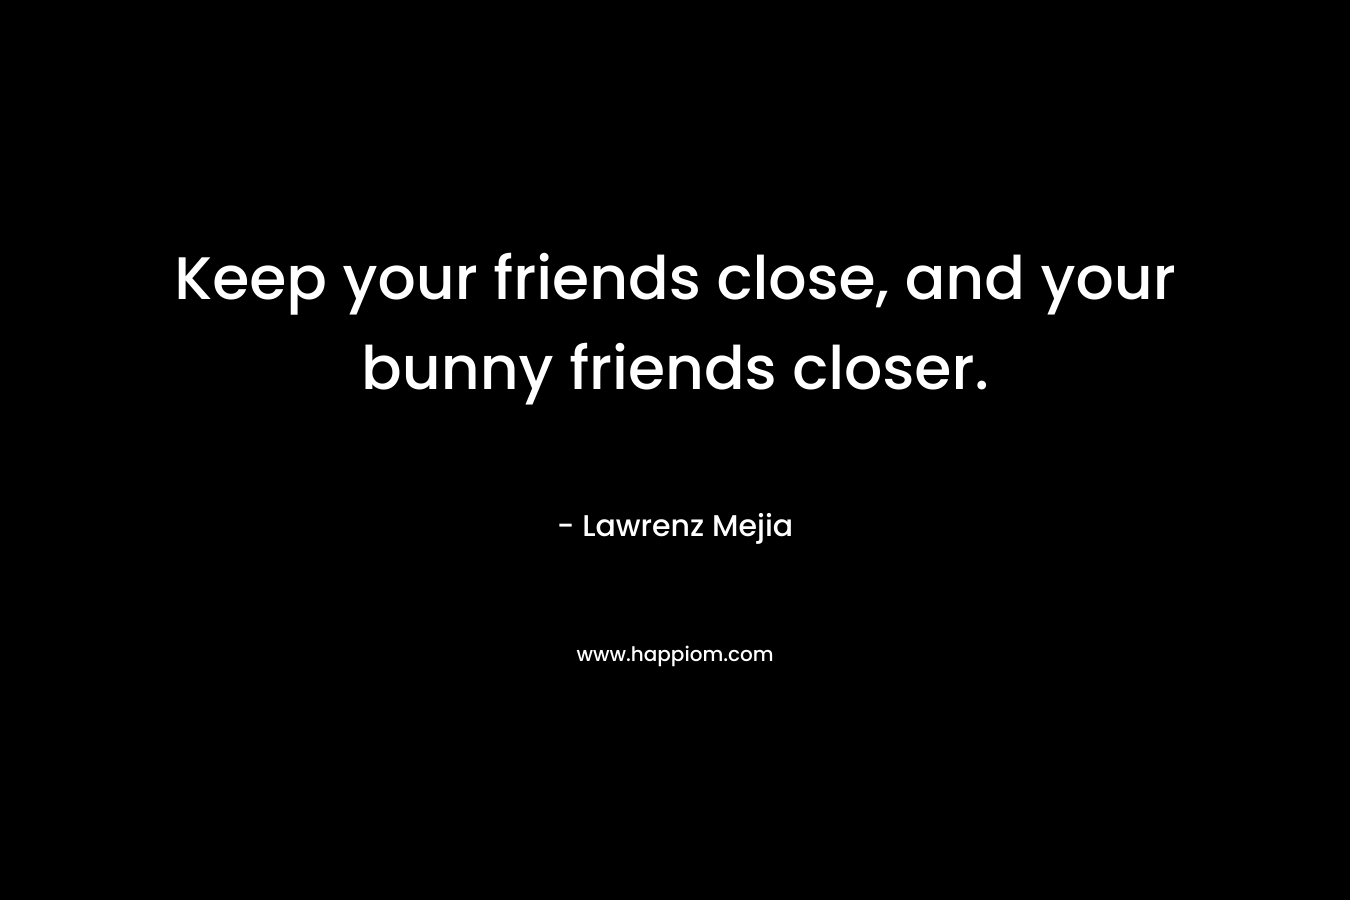 Keep your friends close, and your bunny friends closer. – Lawrenz Mejia